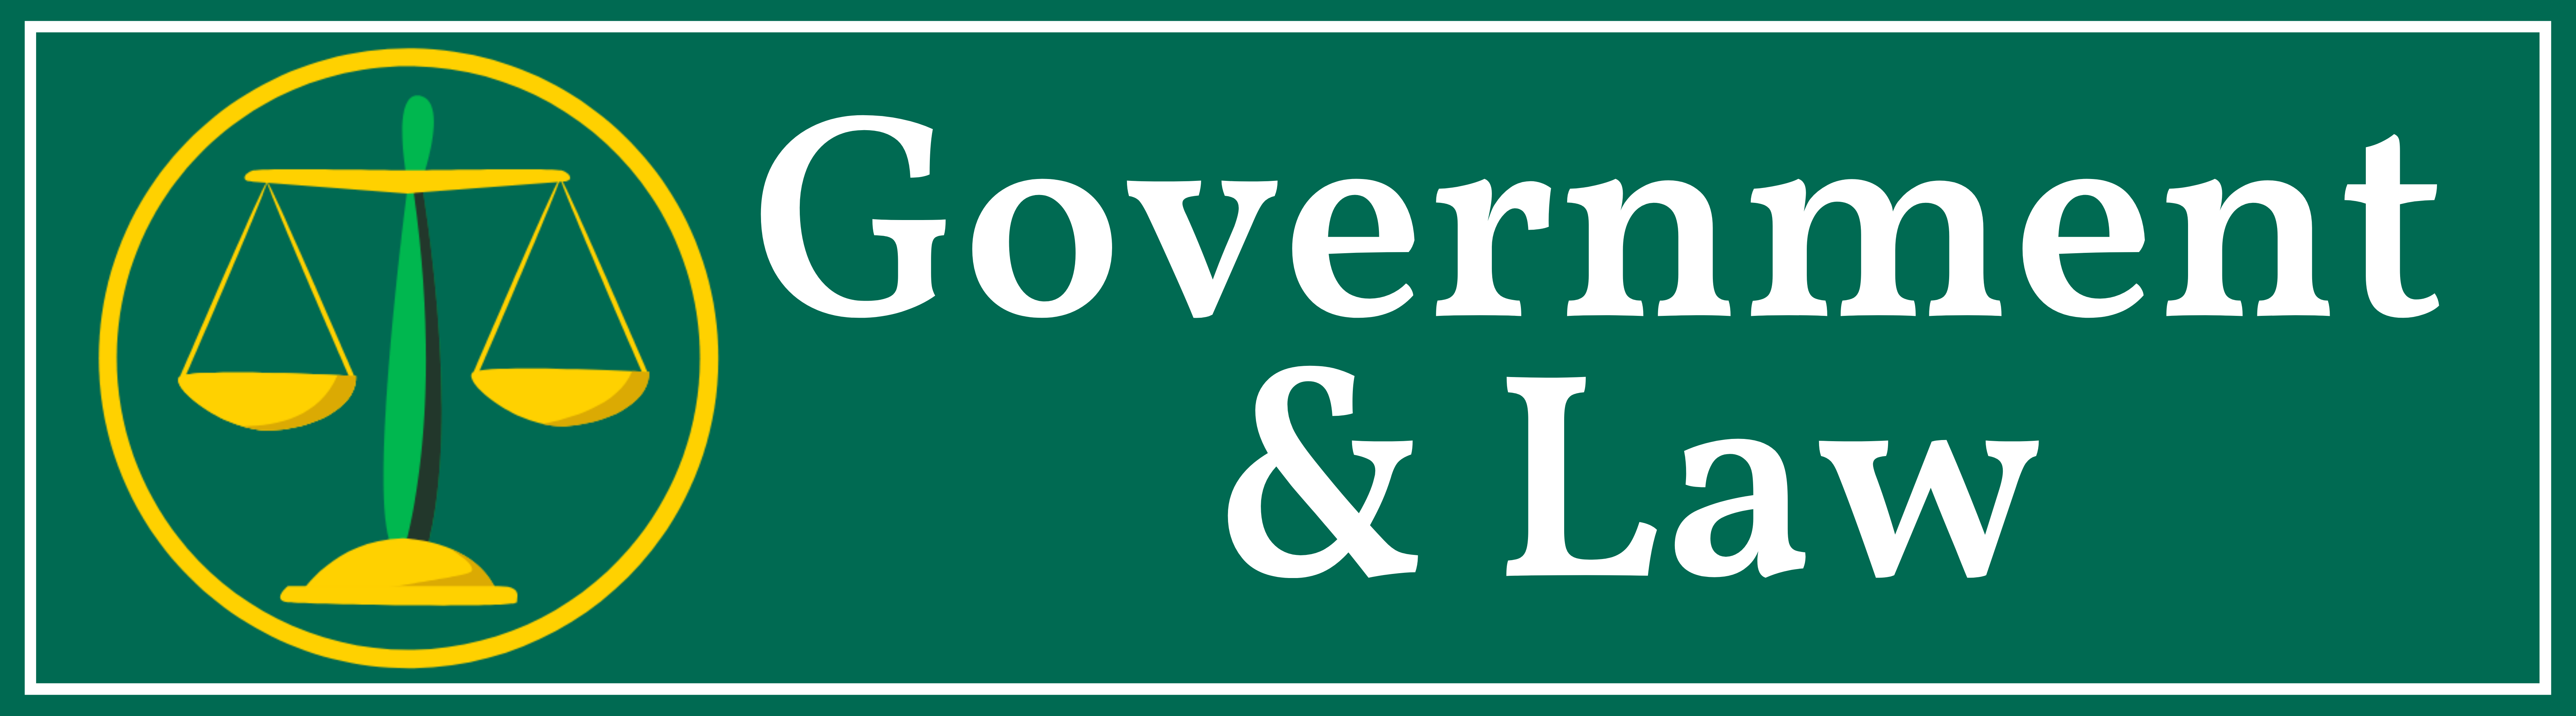 Government & Law Community